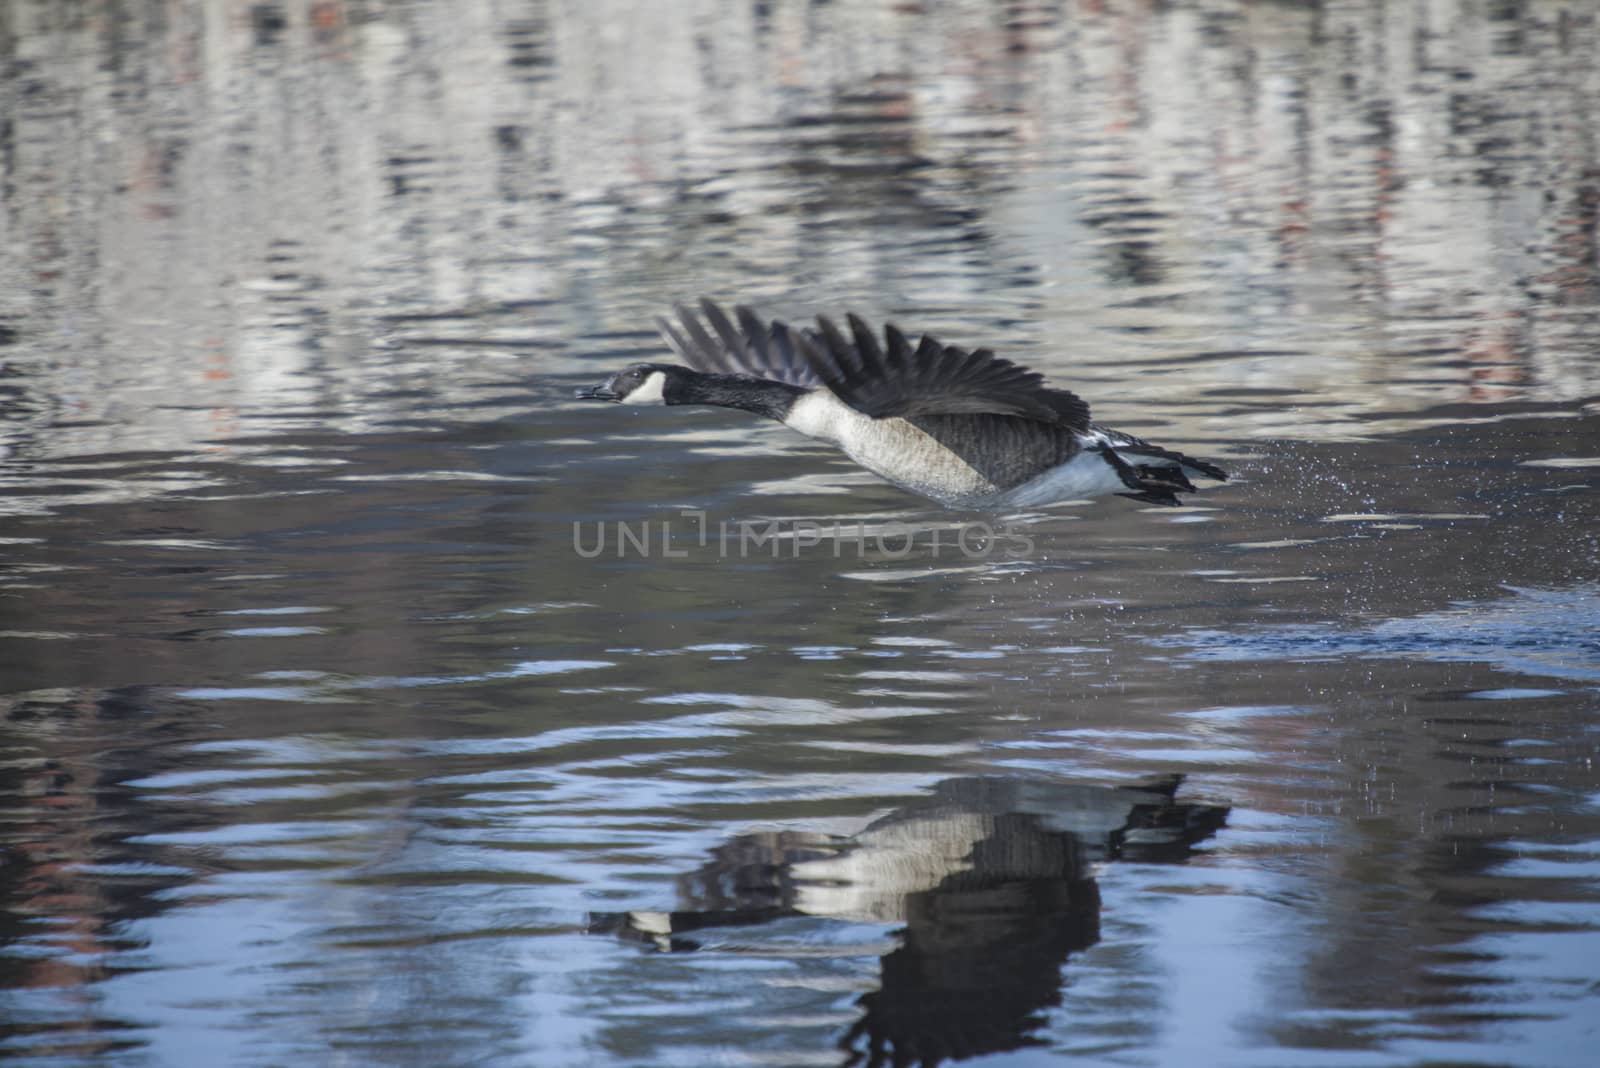 Image series. The images are shot by the Tista river in Halden, Norway when the goose is about to fly from the river. March 2013.